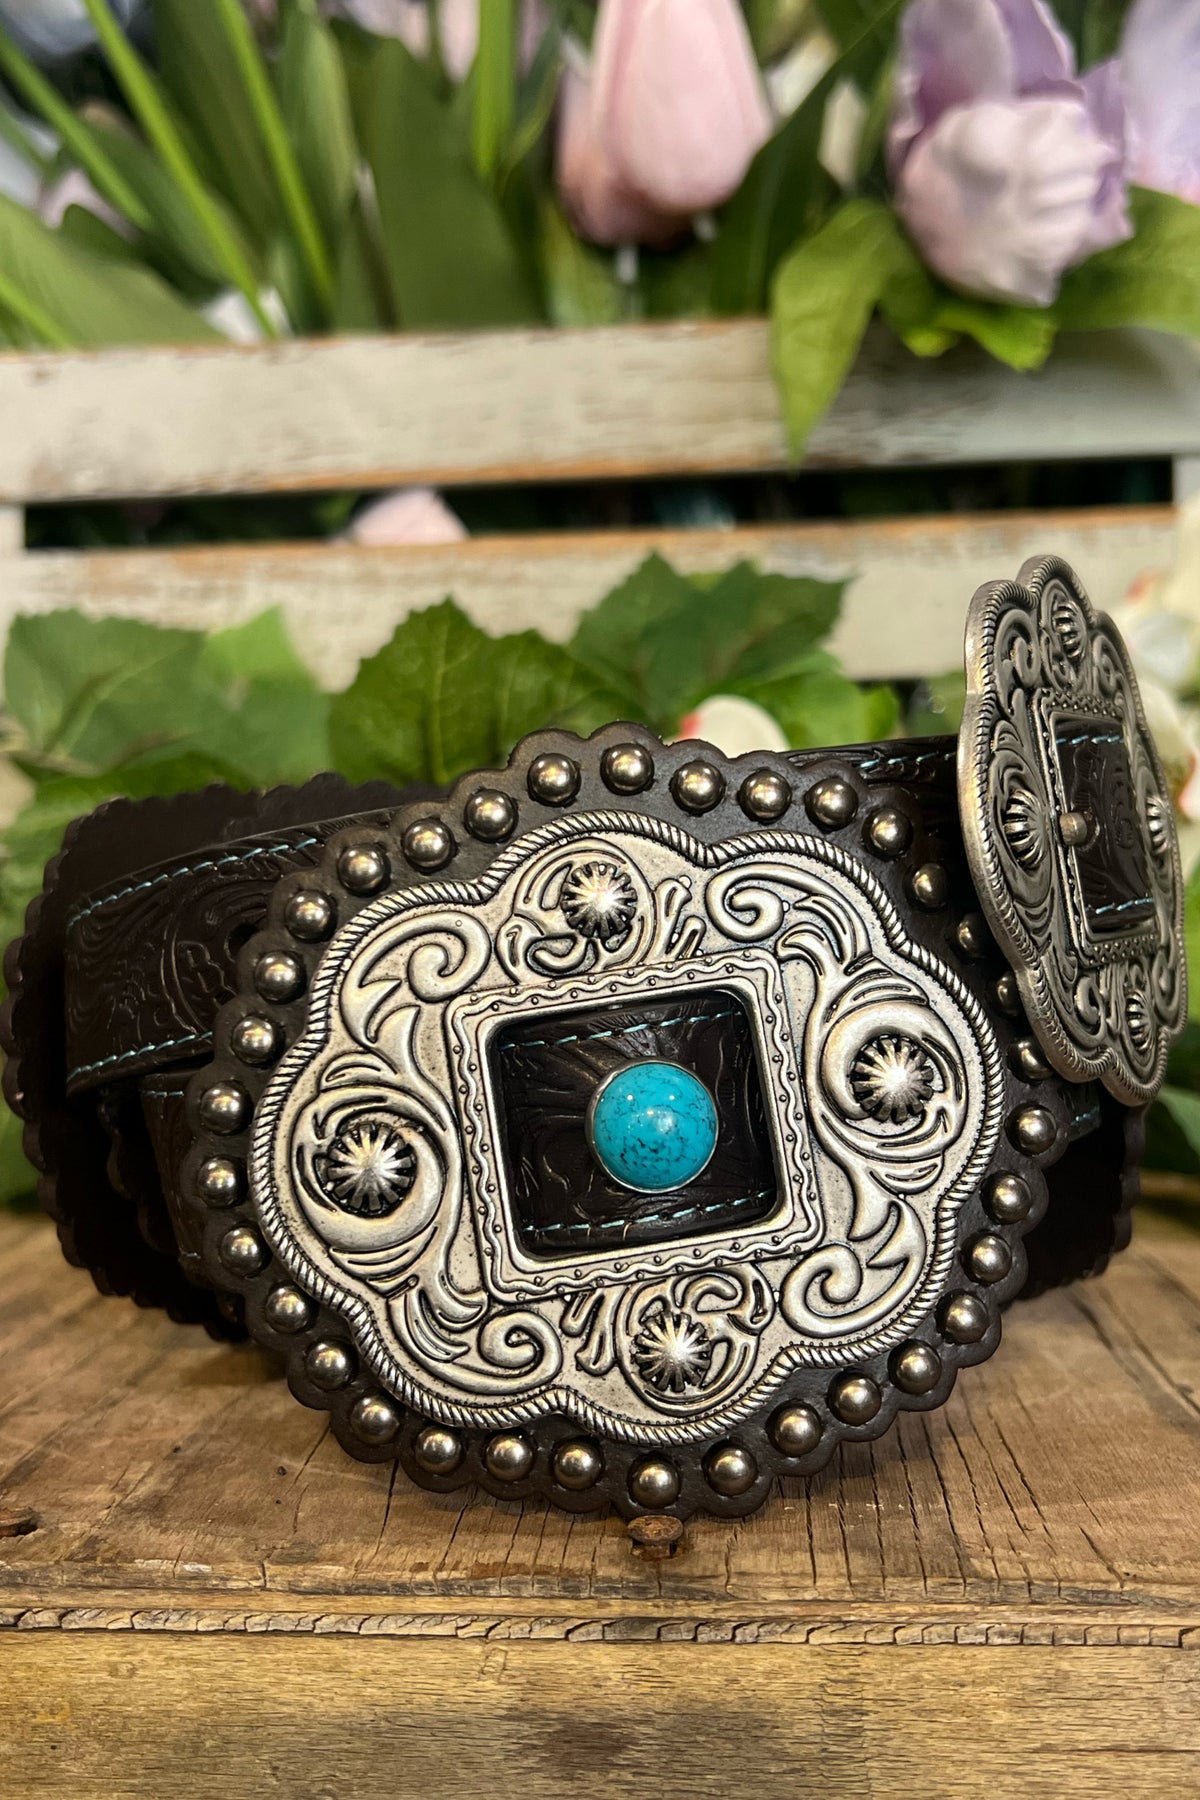 Women's Tooled Concho Belt with Turquoise Studs by Roper-Belt-Gem Dandy-Gallop 'n Glitz- Women's Western Wear Boutique, Located in Grants Pass, Oregon